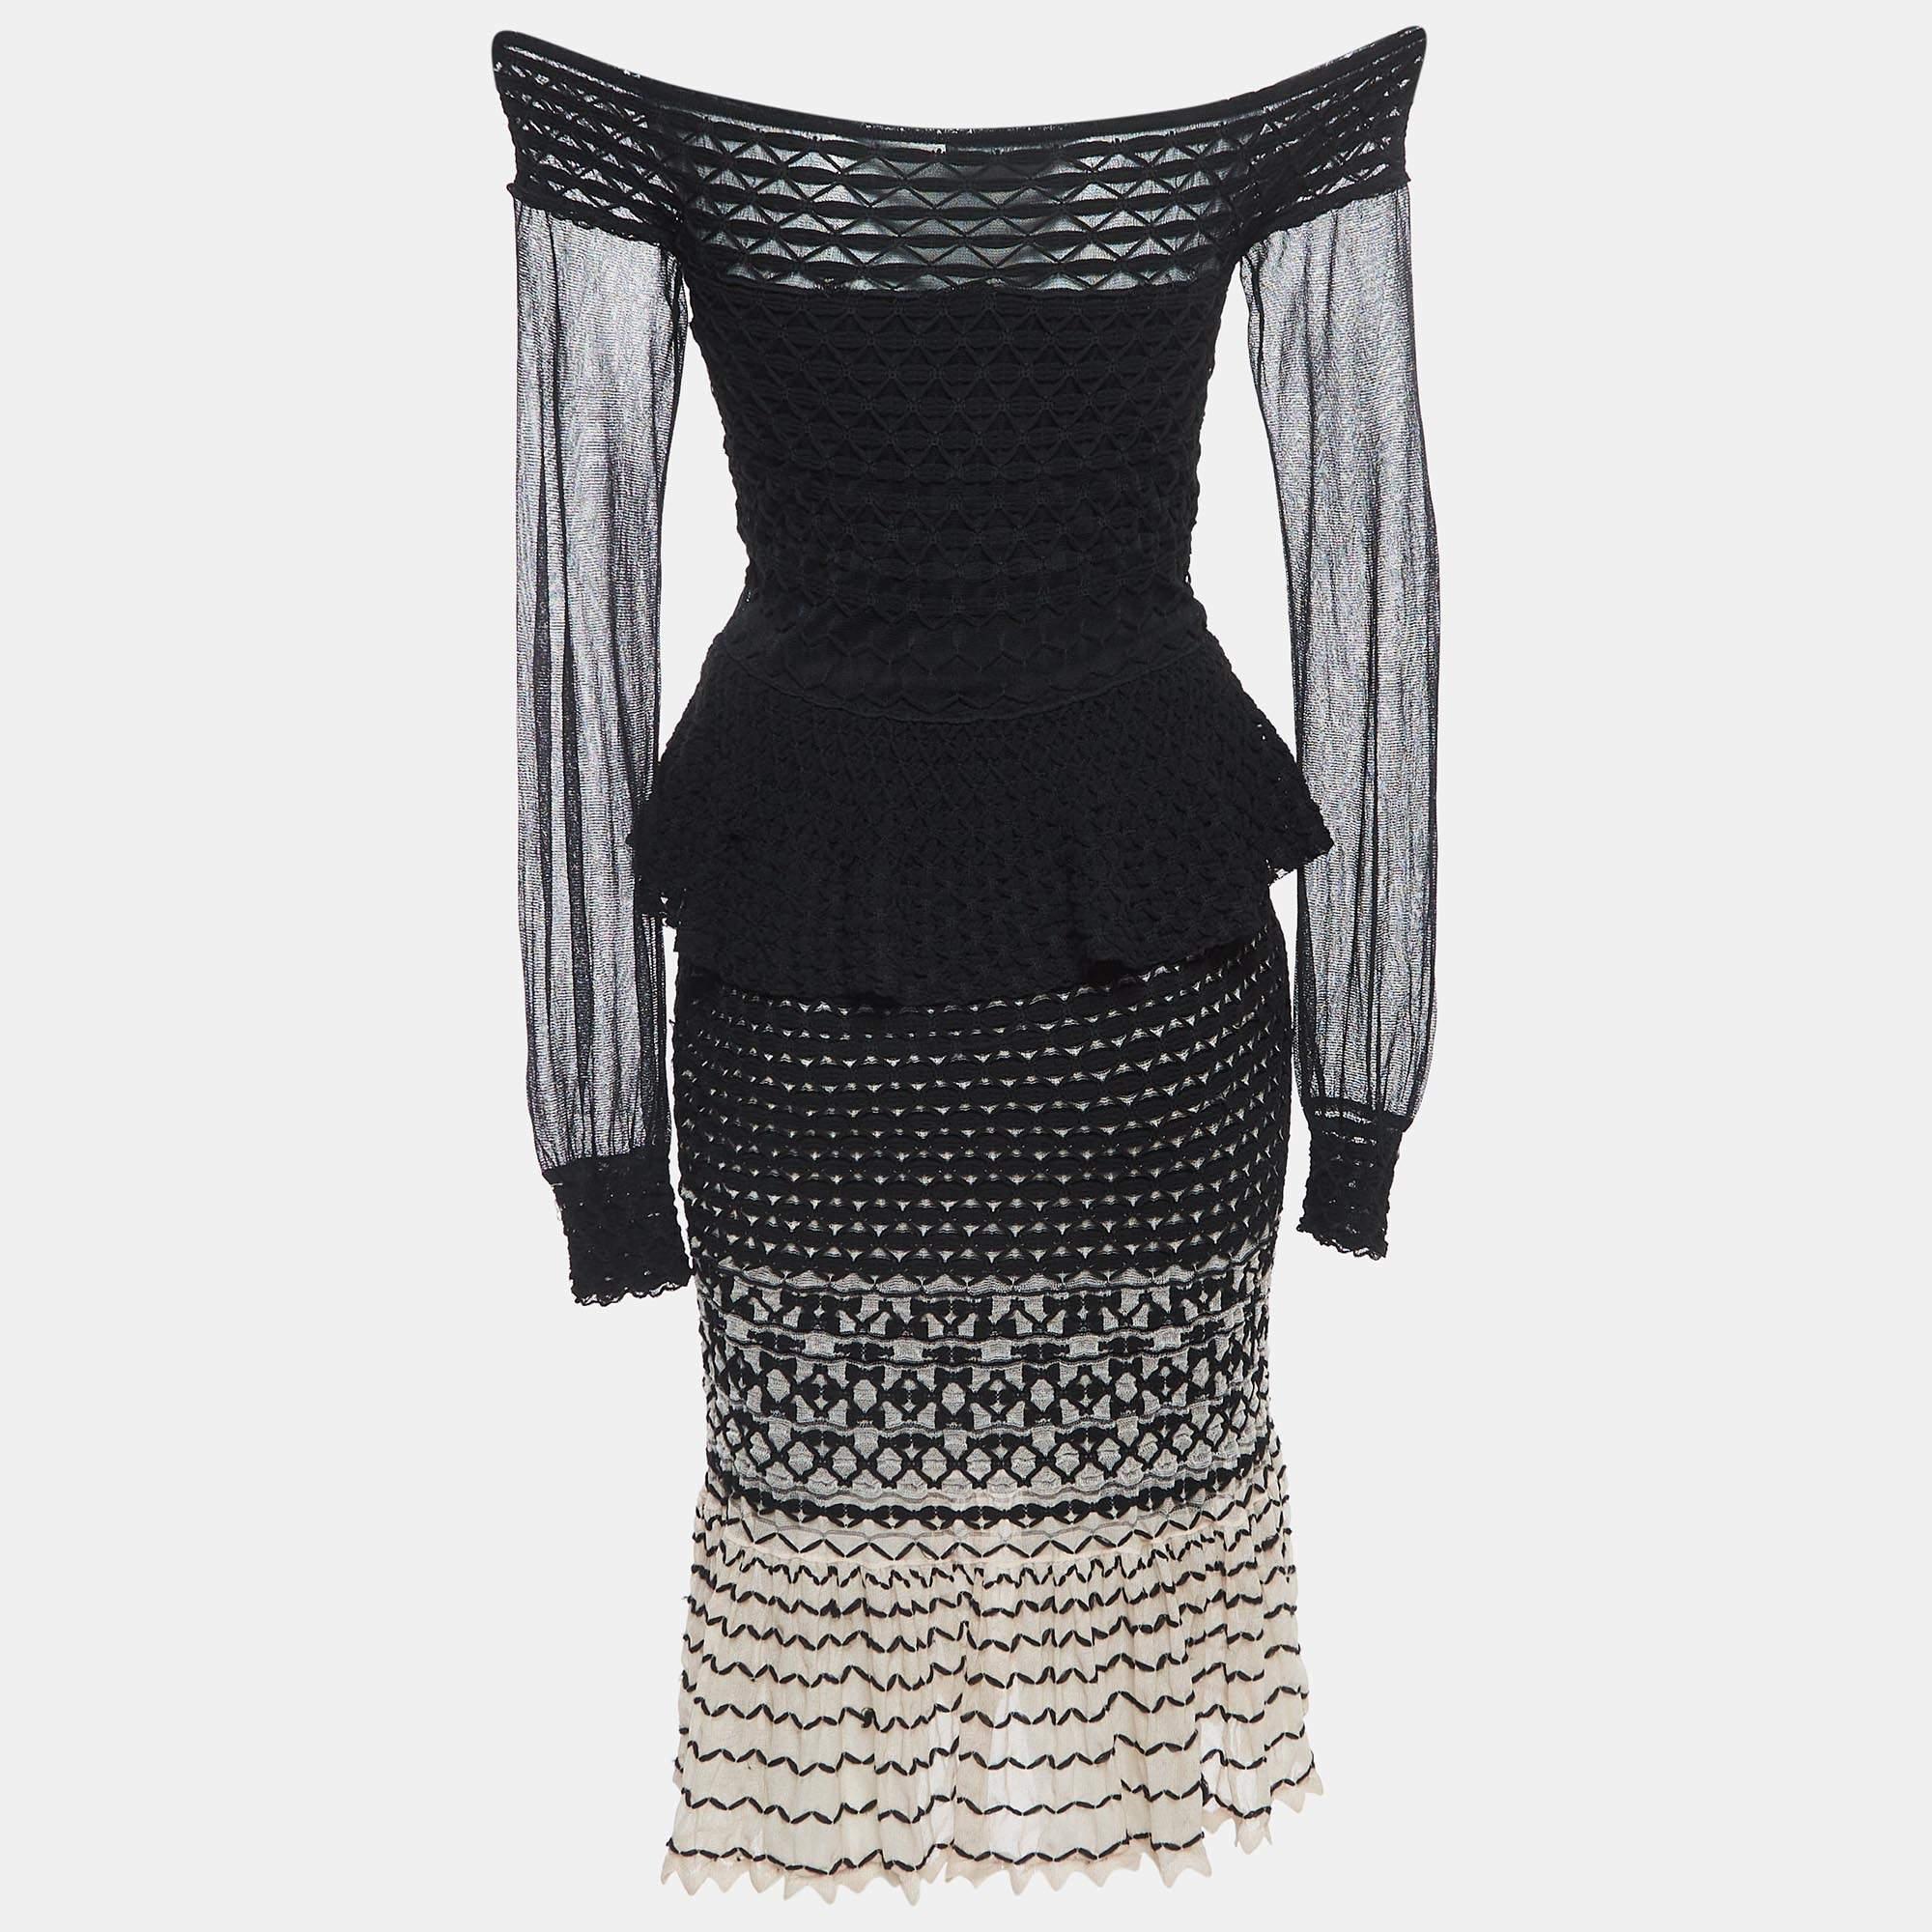 Effortlessly made into a chic design, this Alexander McQueen dress is easy to wear and easy to accessorize. Tailored beautifully, the dress is sure to remain a favorite season after season.

